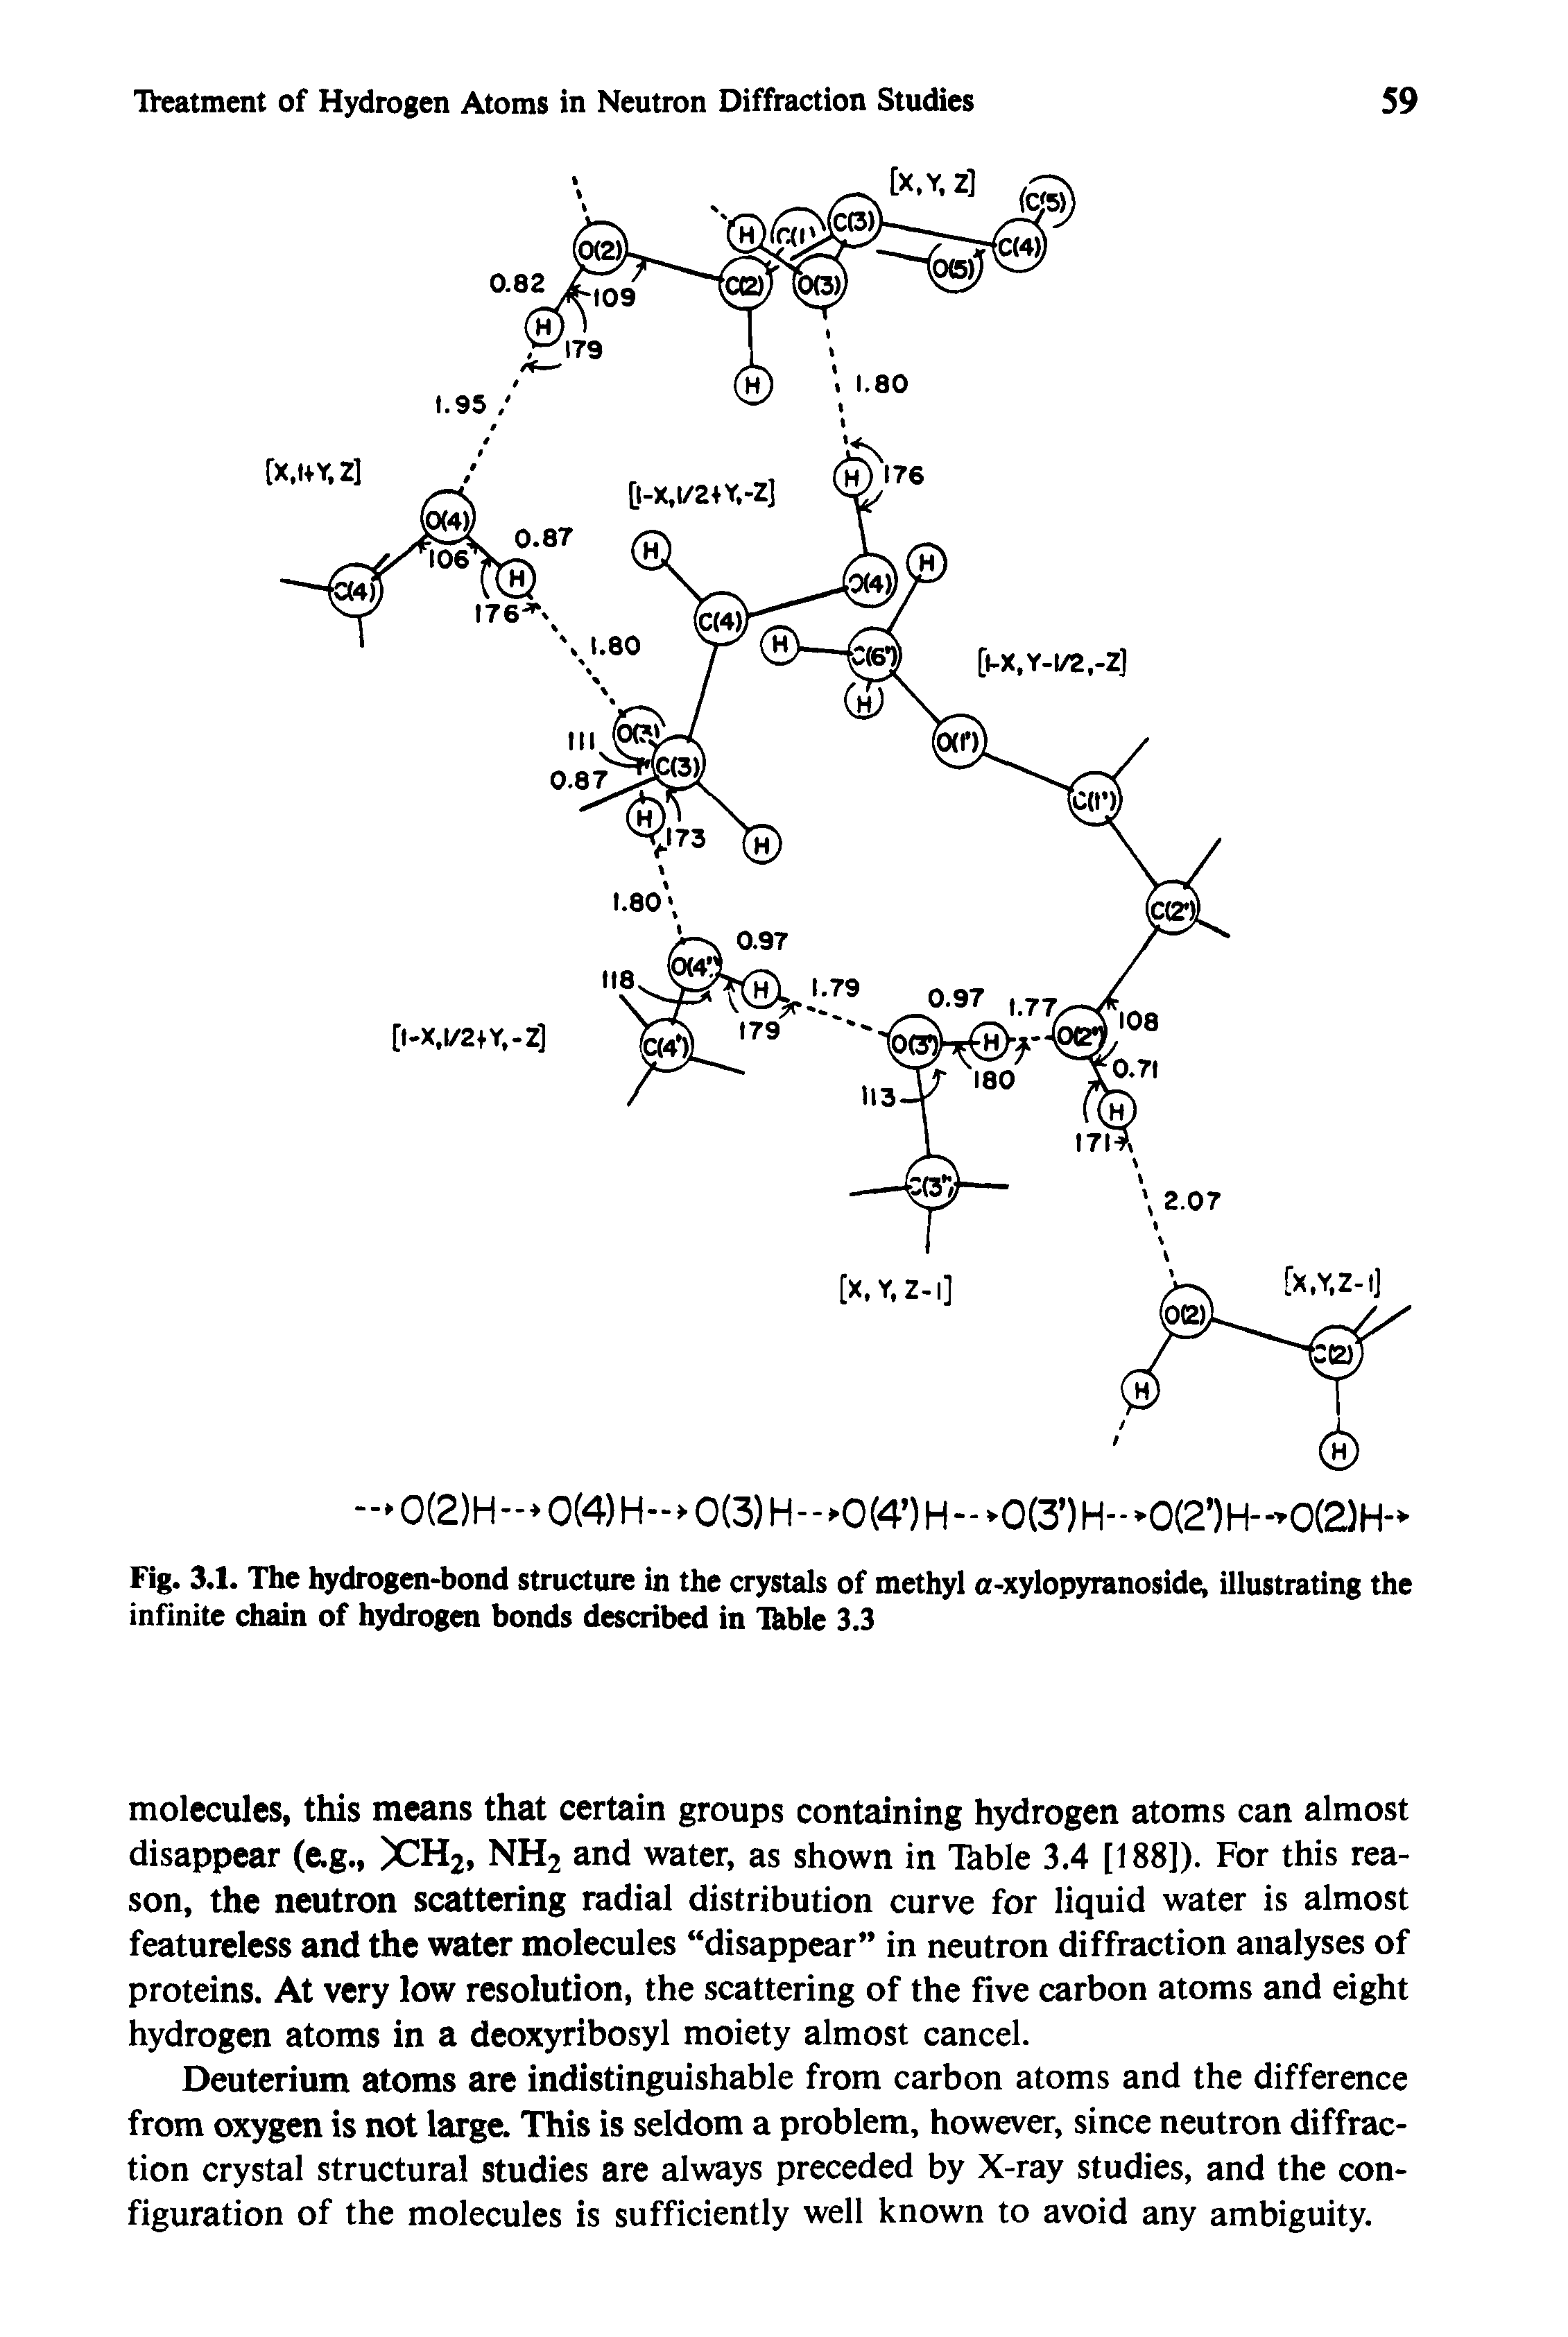 Fig. 3.1. The hydrogen-bond structure in the crystals of methyl a-xylopyranoside, illustrating the infinite chain of hydrogen bonds described in Thble 3.3...